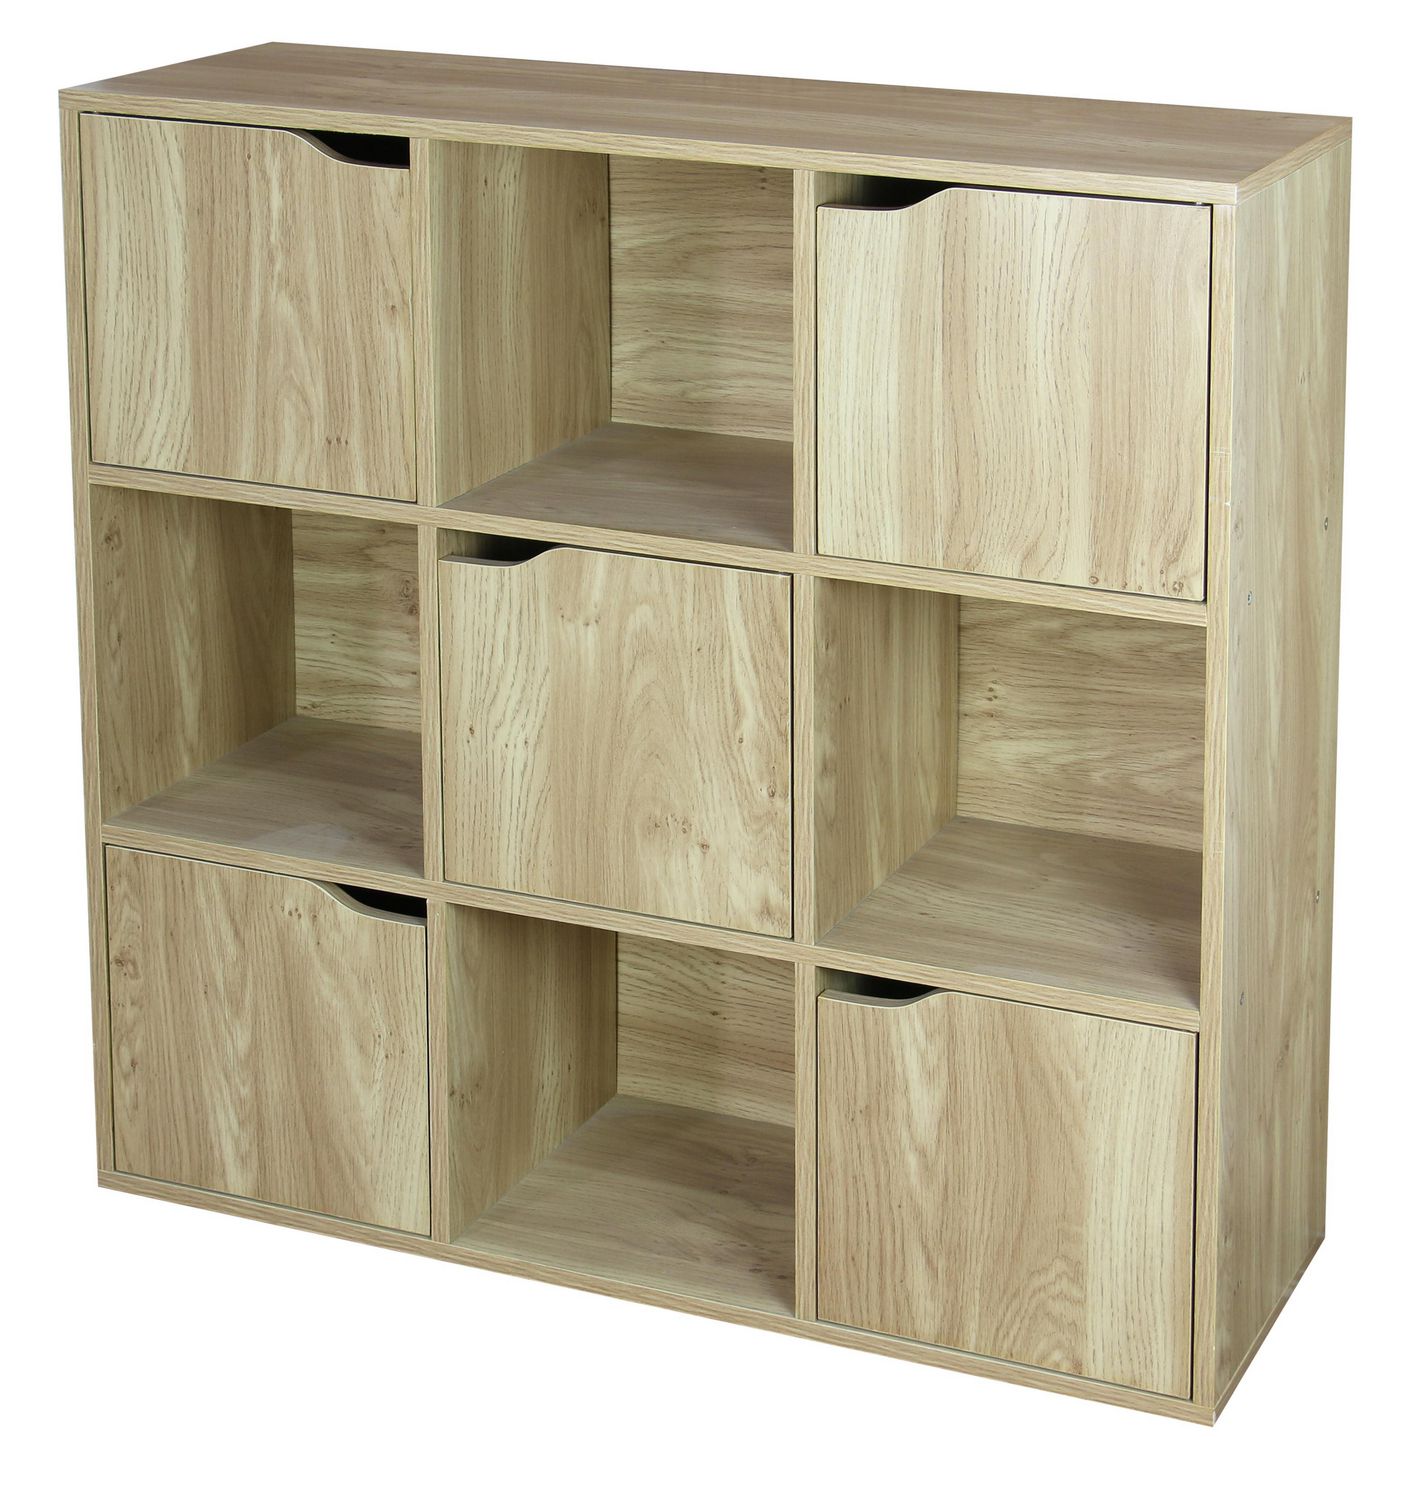 Wooden 2 6 Cube - 3 Doors 4 9 Cube Storage Unit Cupboard Bookcase Shelving Display Shelves